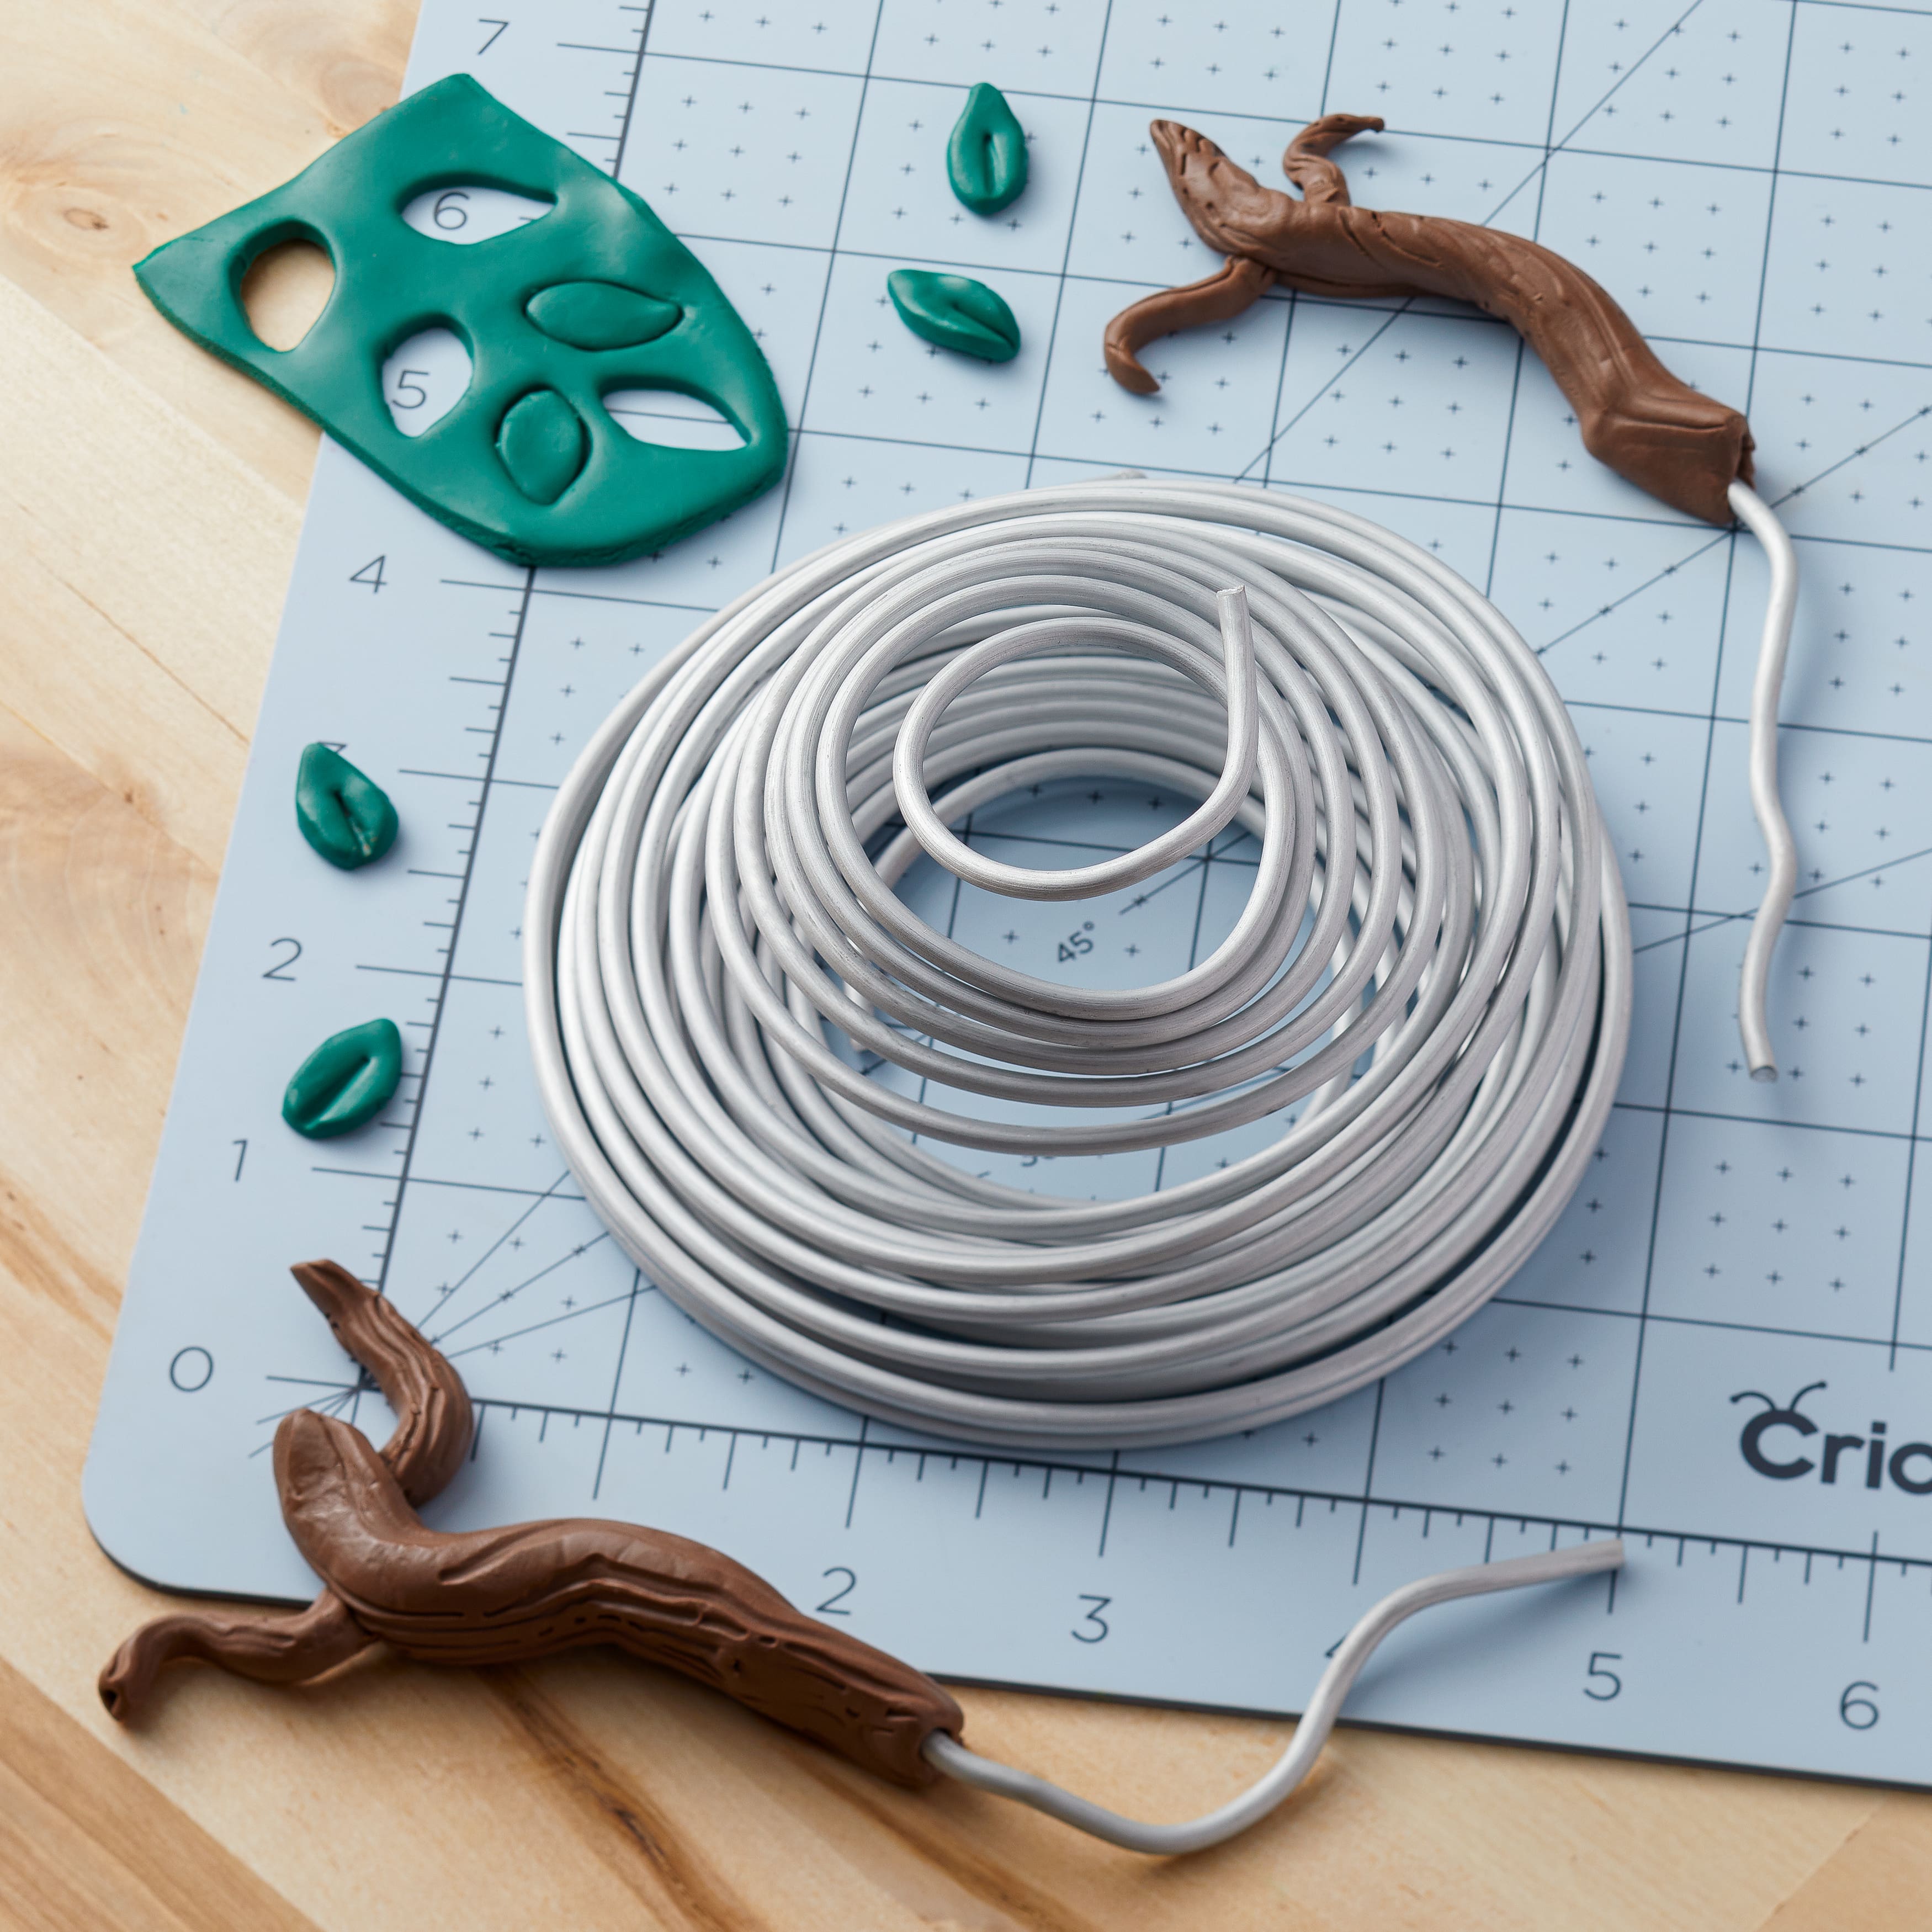 Premium Sculpting &#x26; Armature Wire By Craft Smart&#xAE;, 0.13&#x22; x 20ft